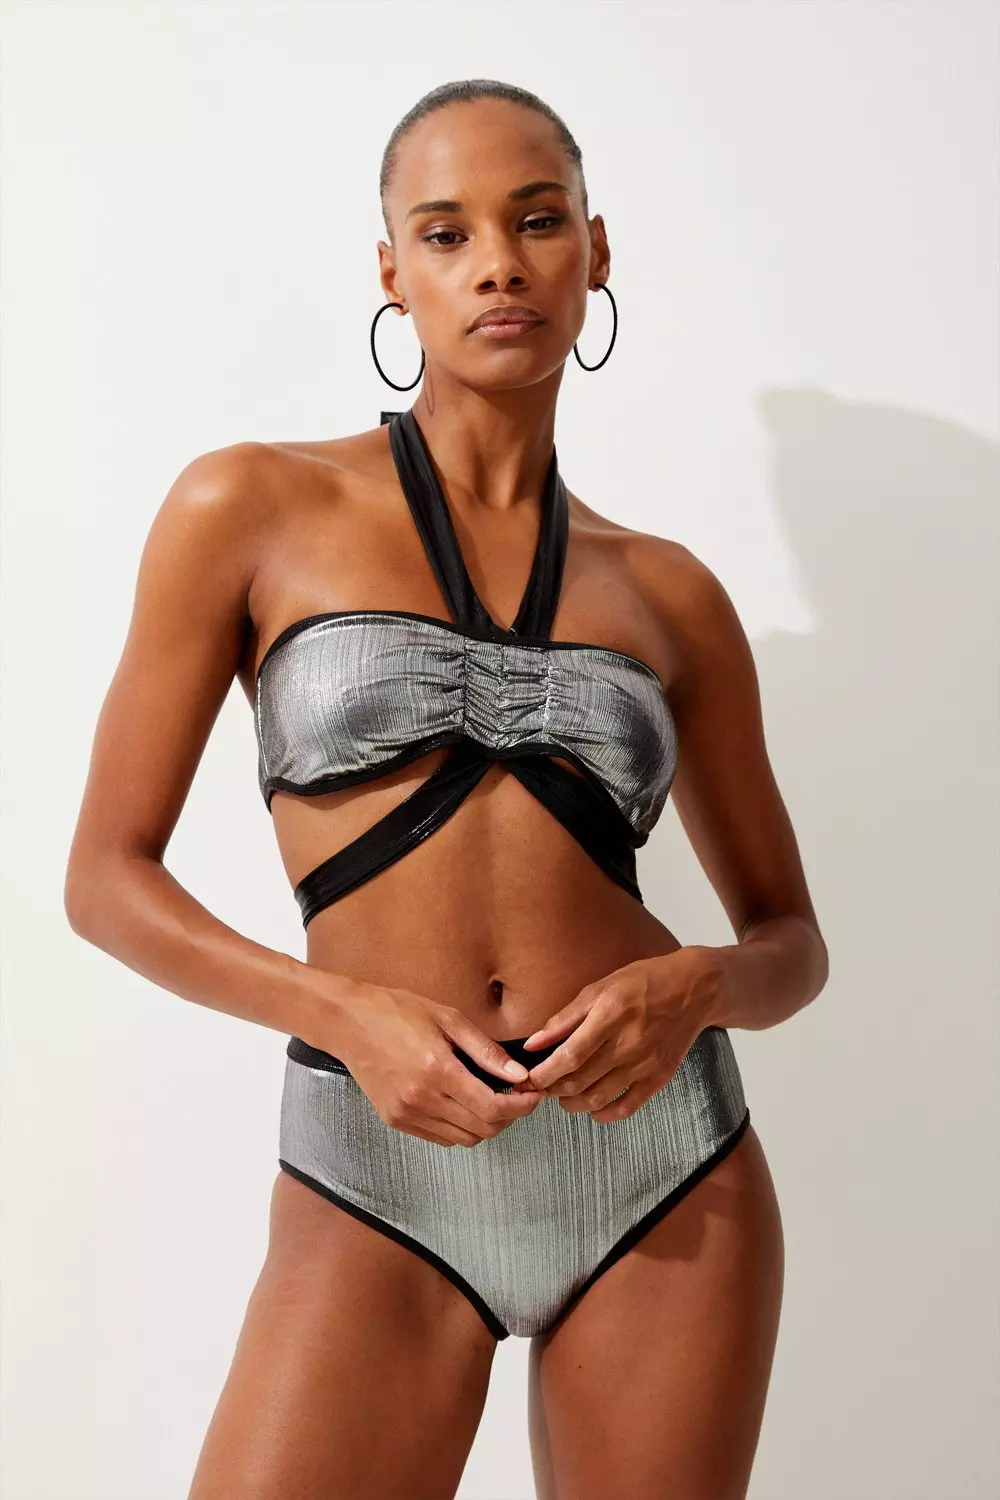 ASOS are selling a swimsuit that can't be worn in water and